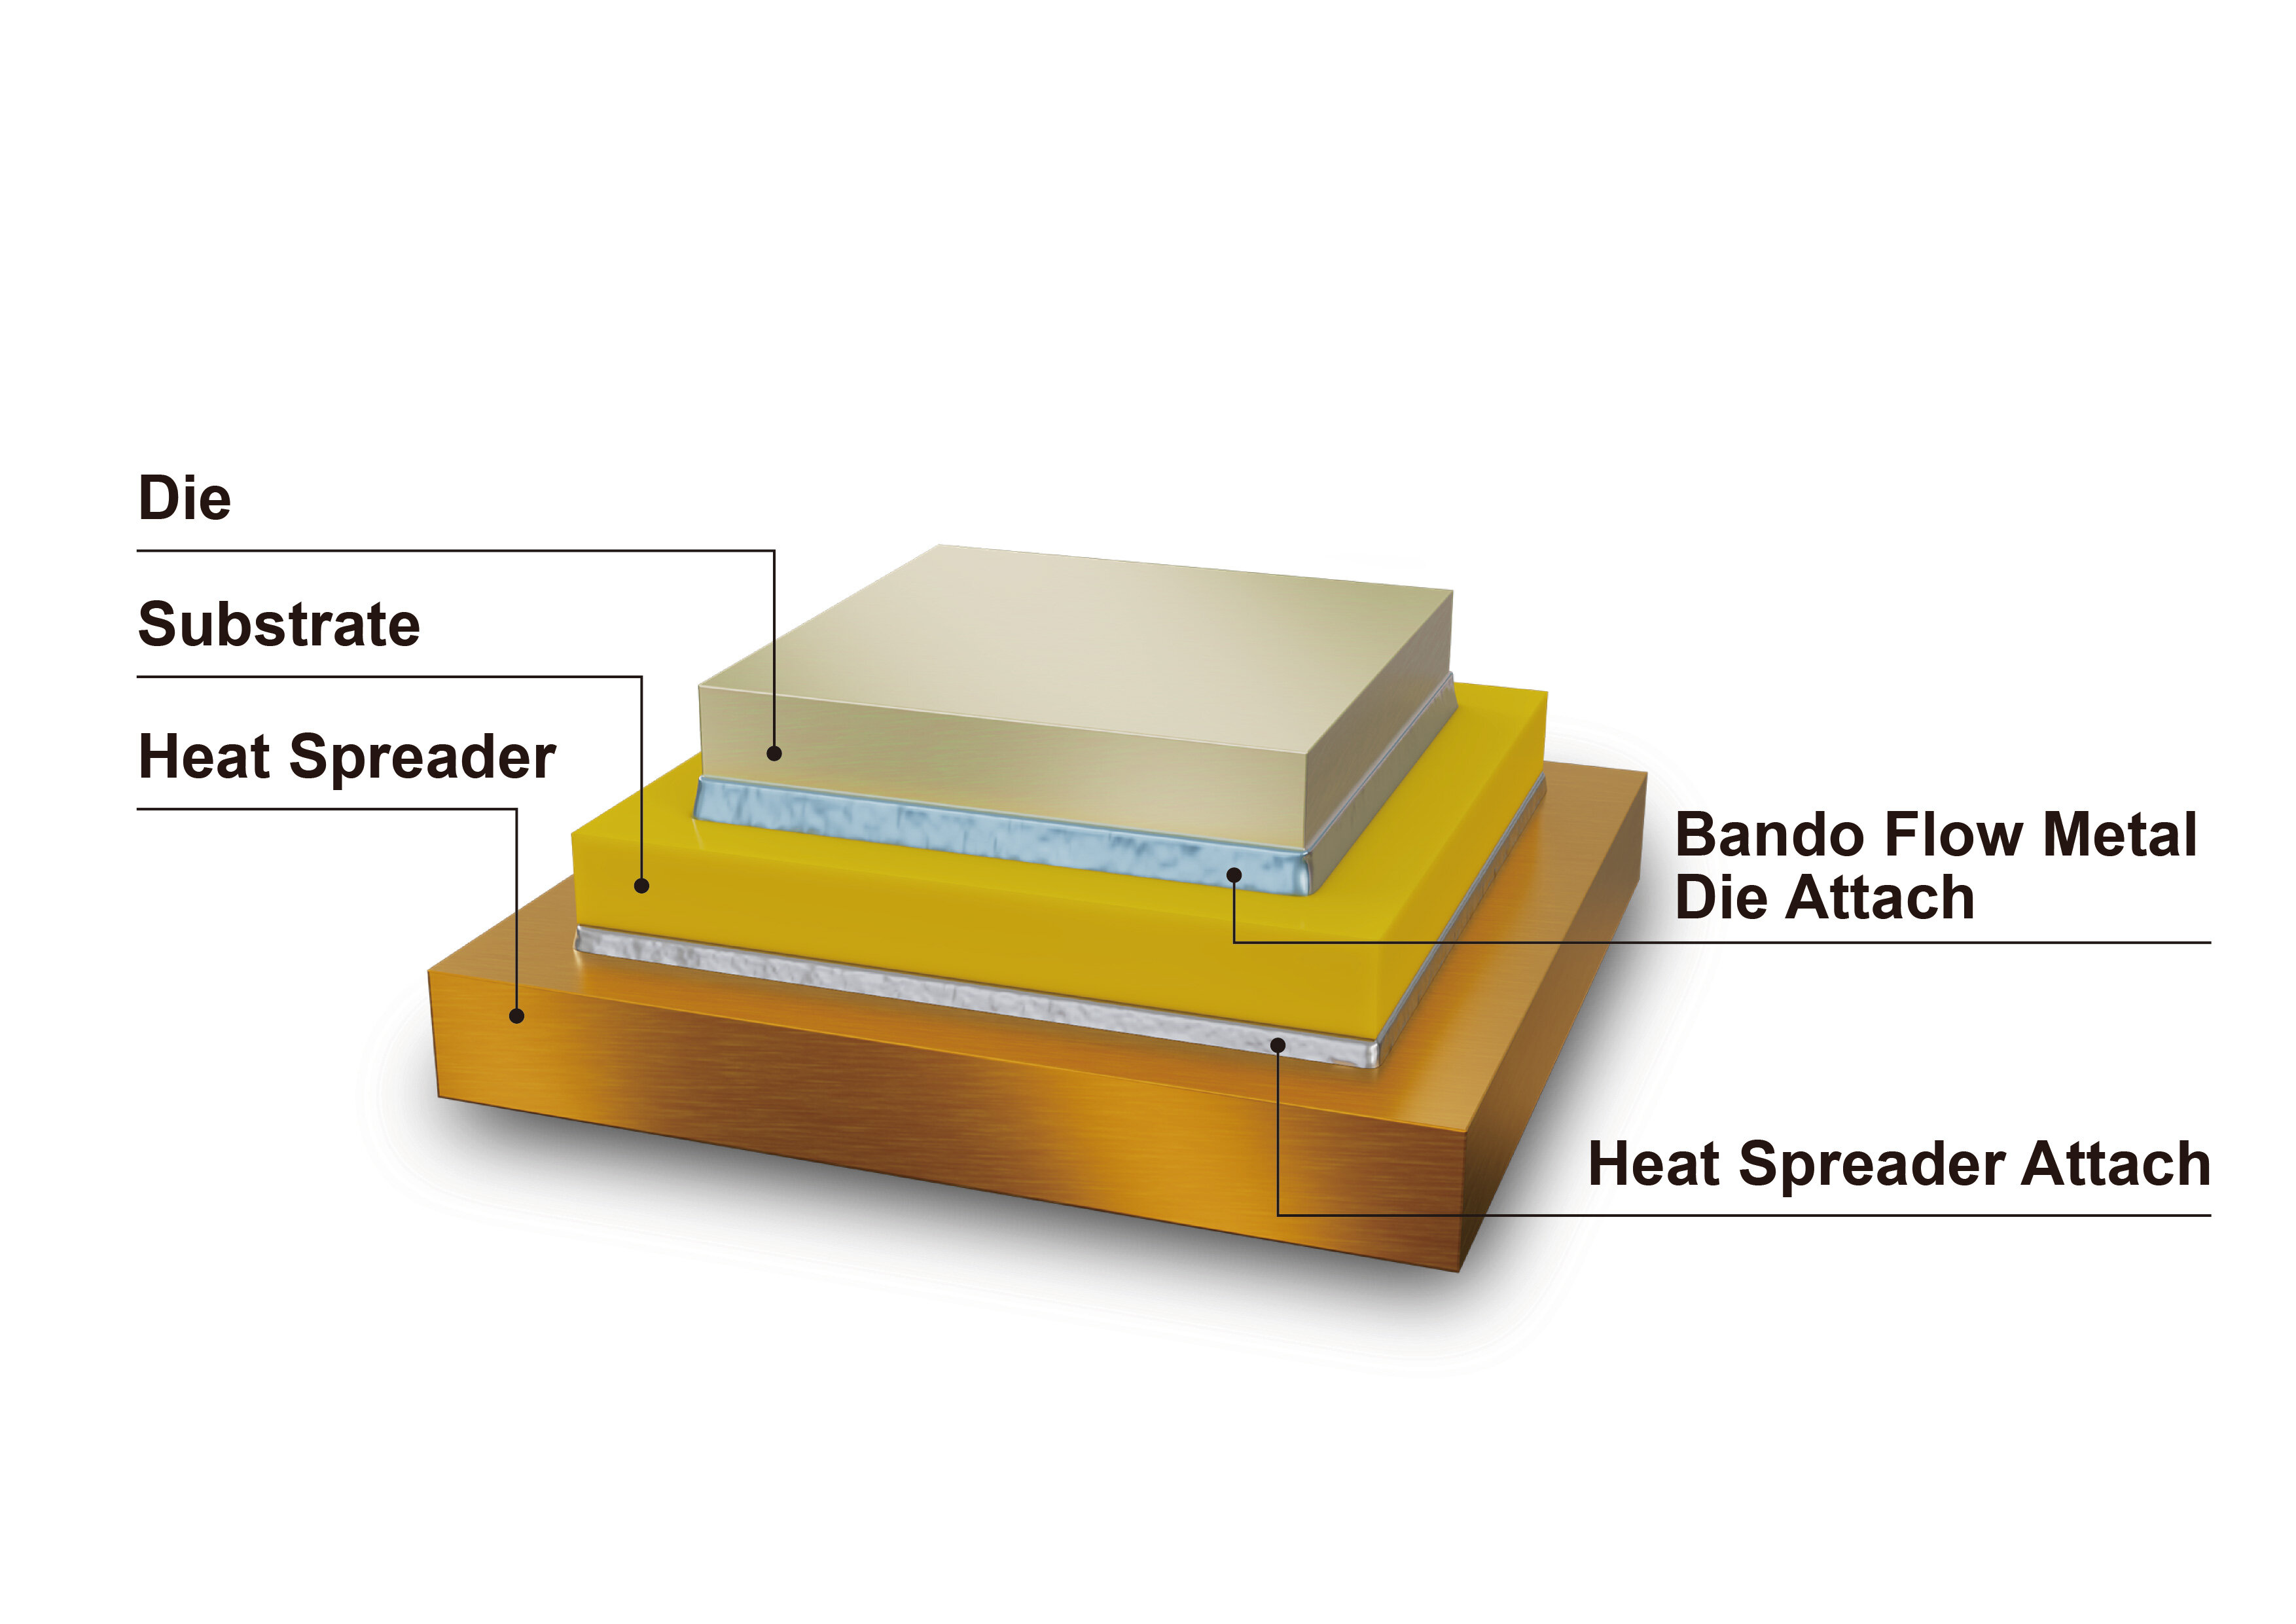 Bonding material usable at high temperatures where solder cannot be used